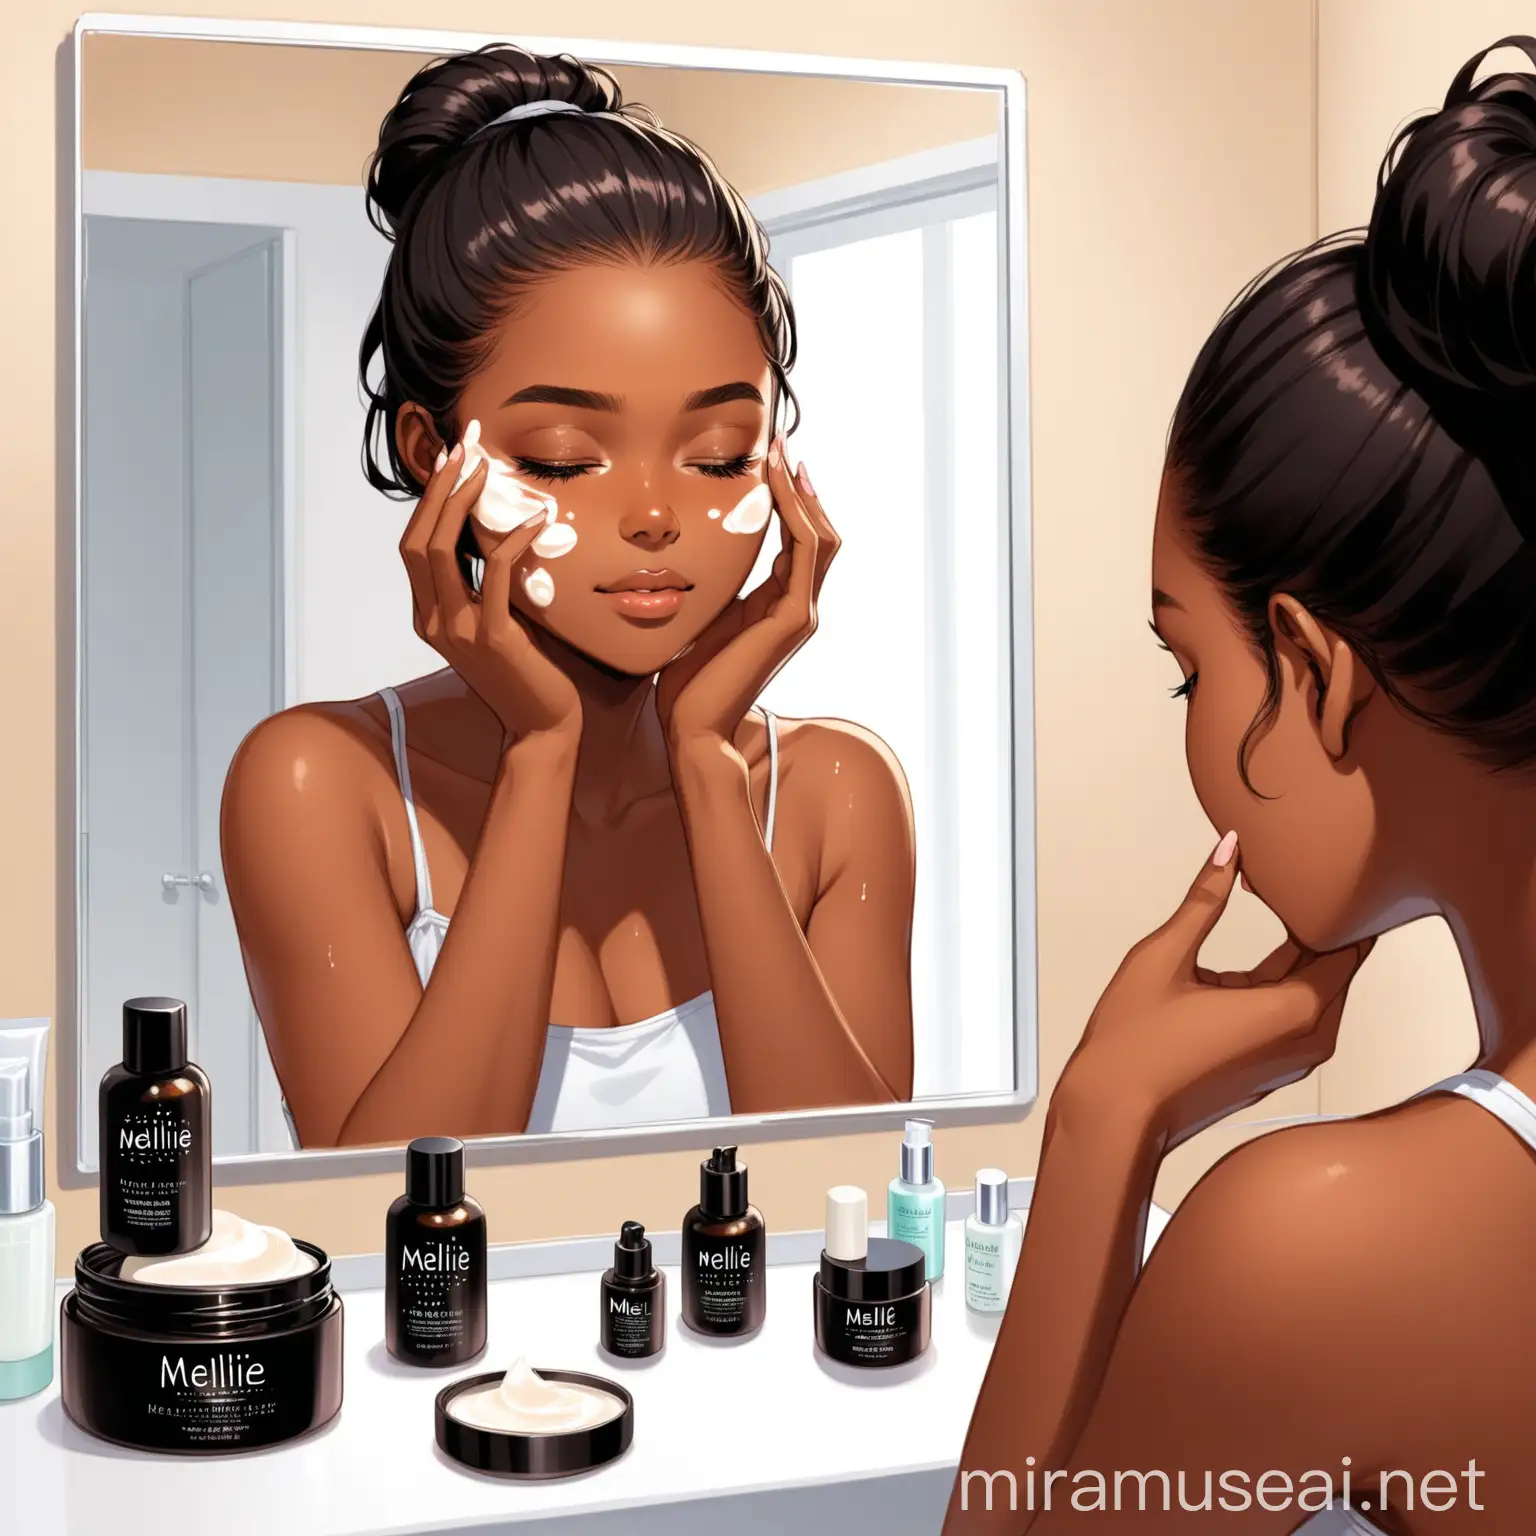 Dark skin girl, sitting in her make room, looking in her mirror on her beautiful face, as she massage her face with moisturizer from a black jar, labeled Mellie Bior 